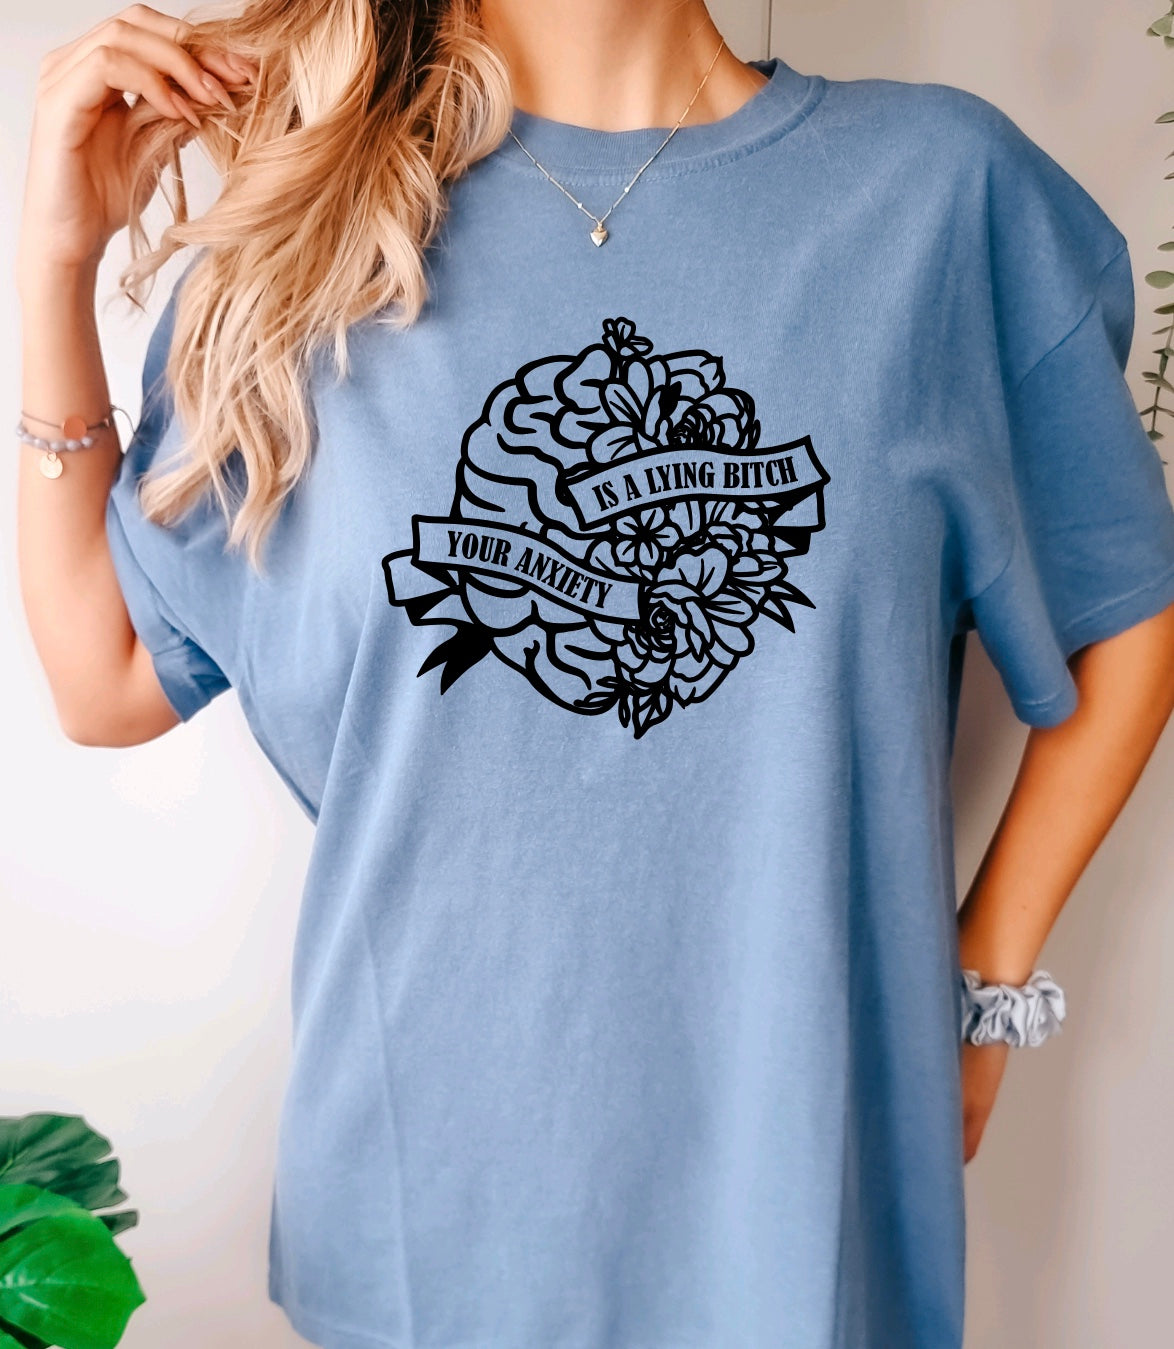 Your anxiety is a lying bitch comfort colors t-shirt with floral brain design in blue jean 